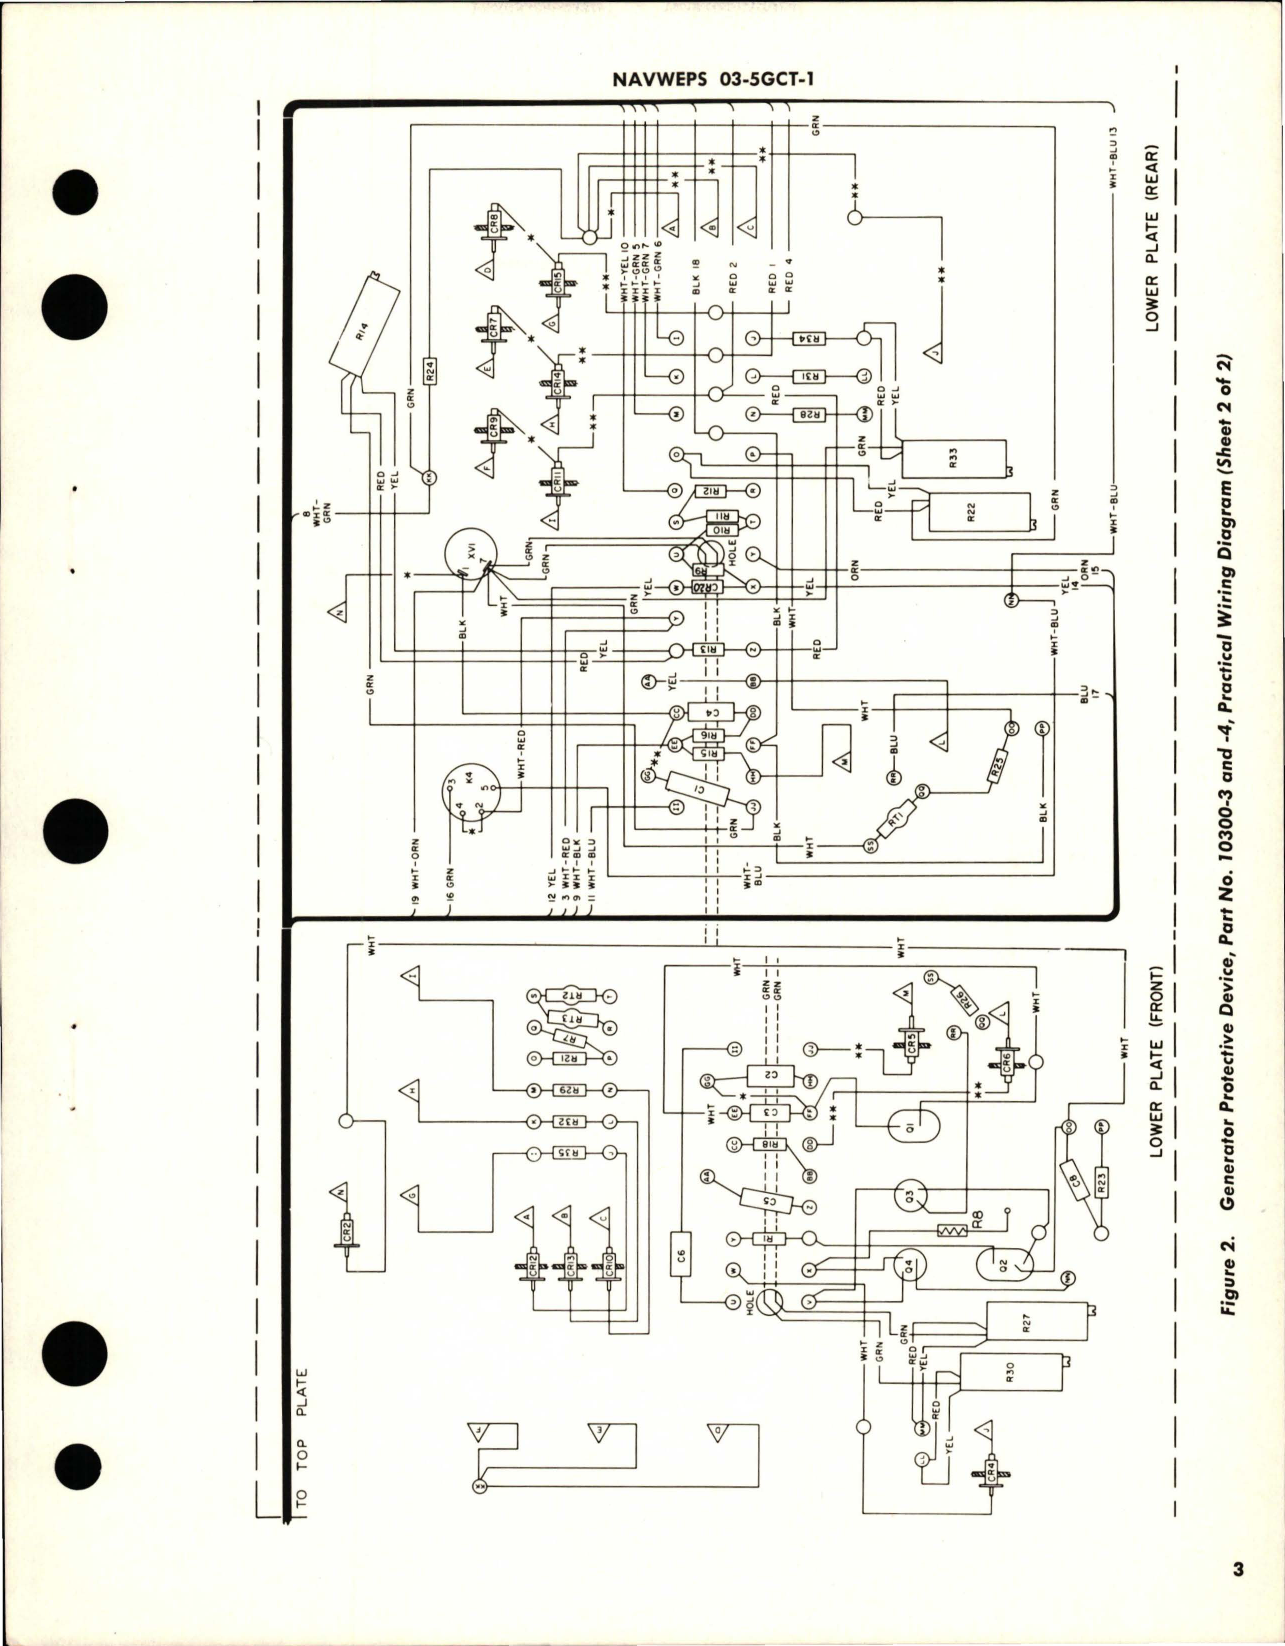 Sample page 5 from AirCorps Library document: Overhaul Instructions with Illustrated Parts Breakdown for Generator Protective Device - Parts 10300-3 and 10300-4